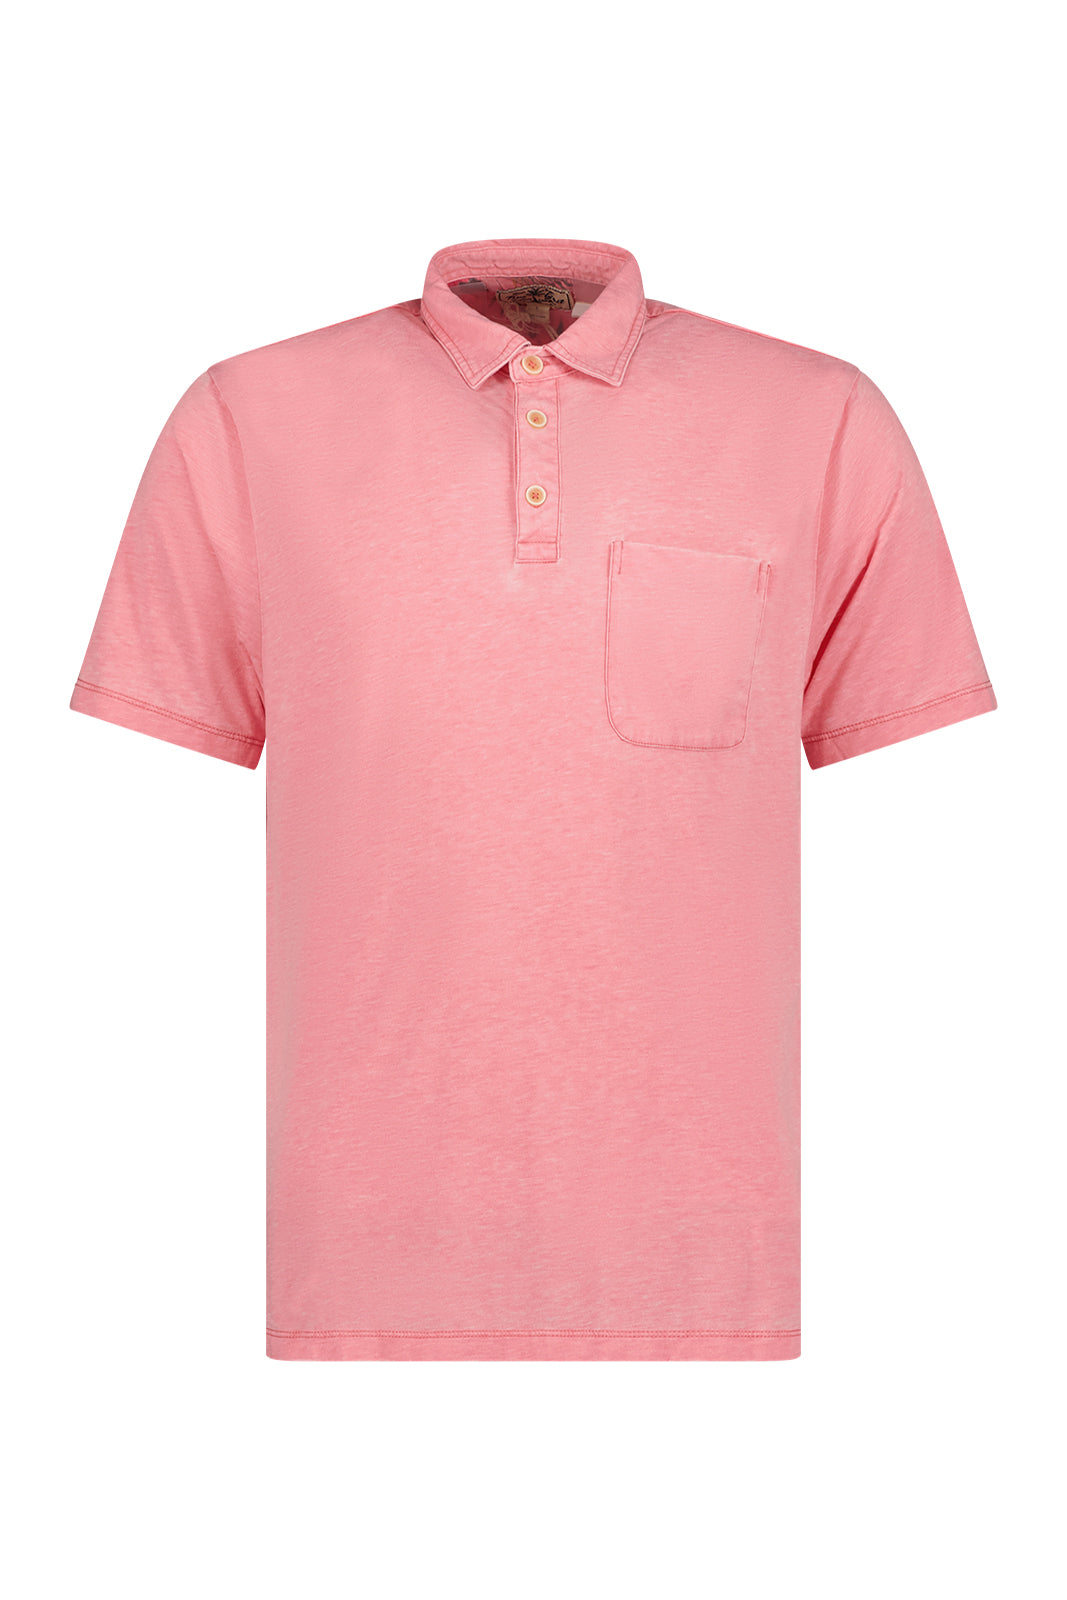 Bowery Burnout S/S Polo